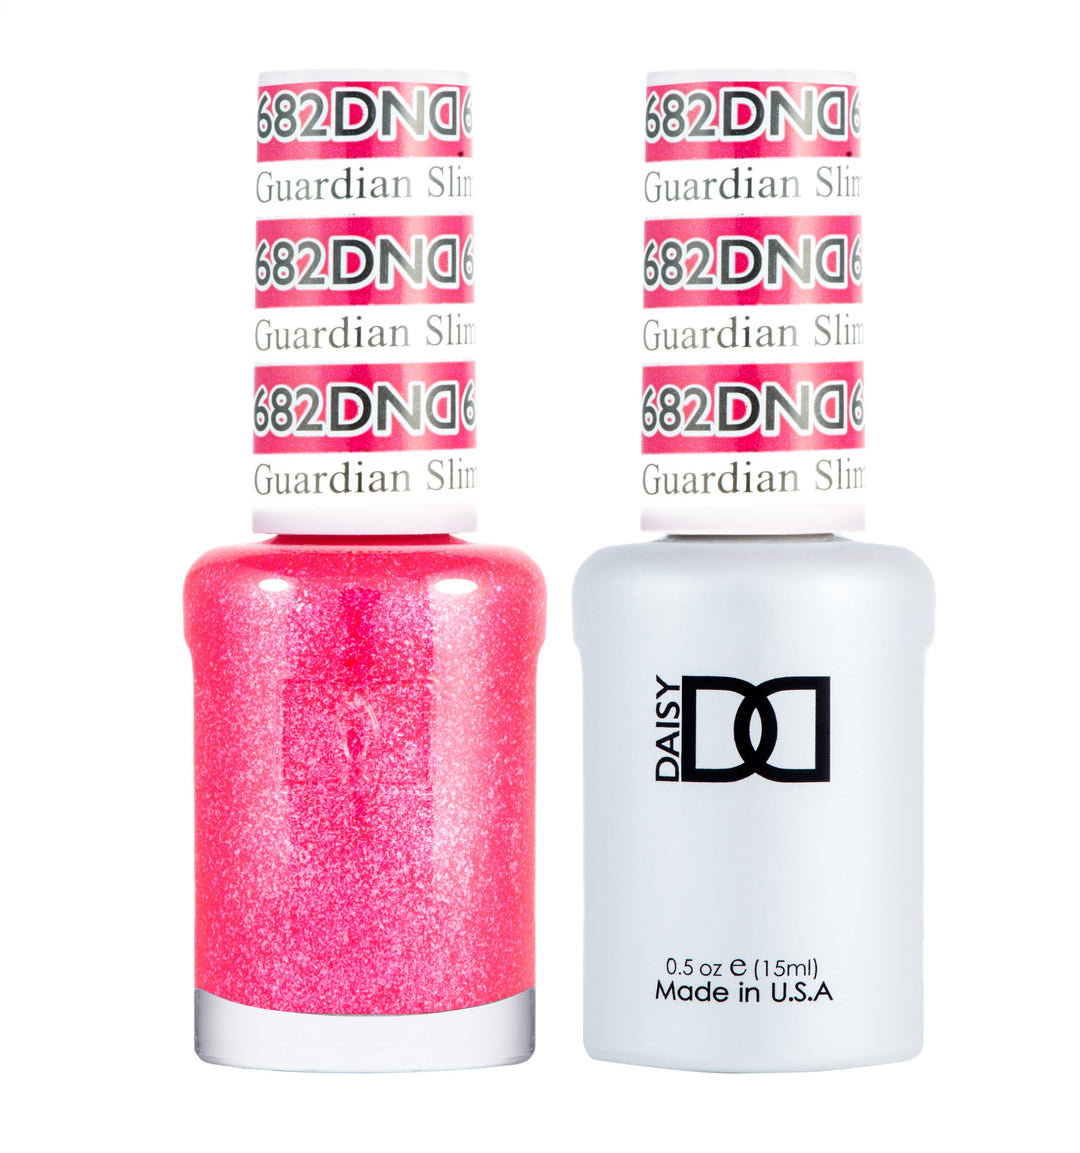 DND DUO Nail Lacquer and UV|LED Gel Polish Gaurdian Slimmer 682 (2 x 15ml)